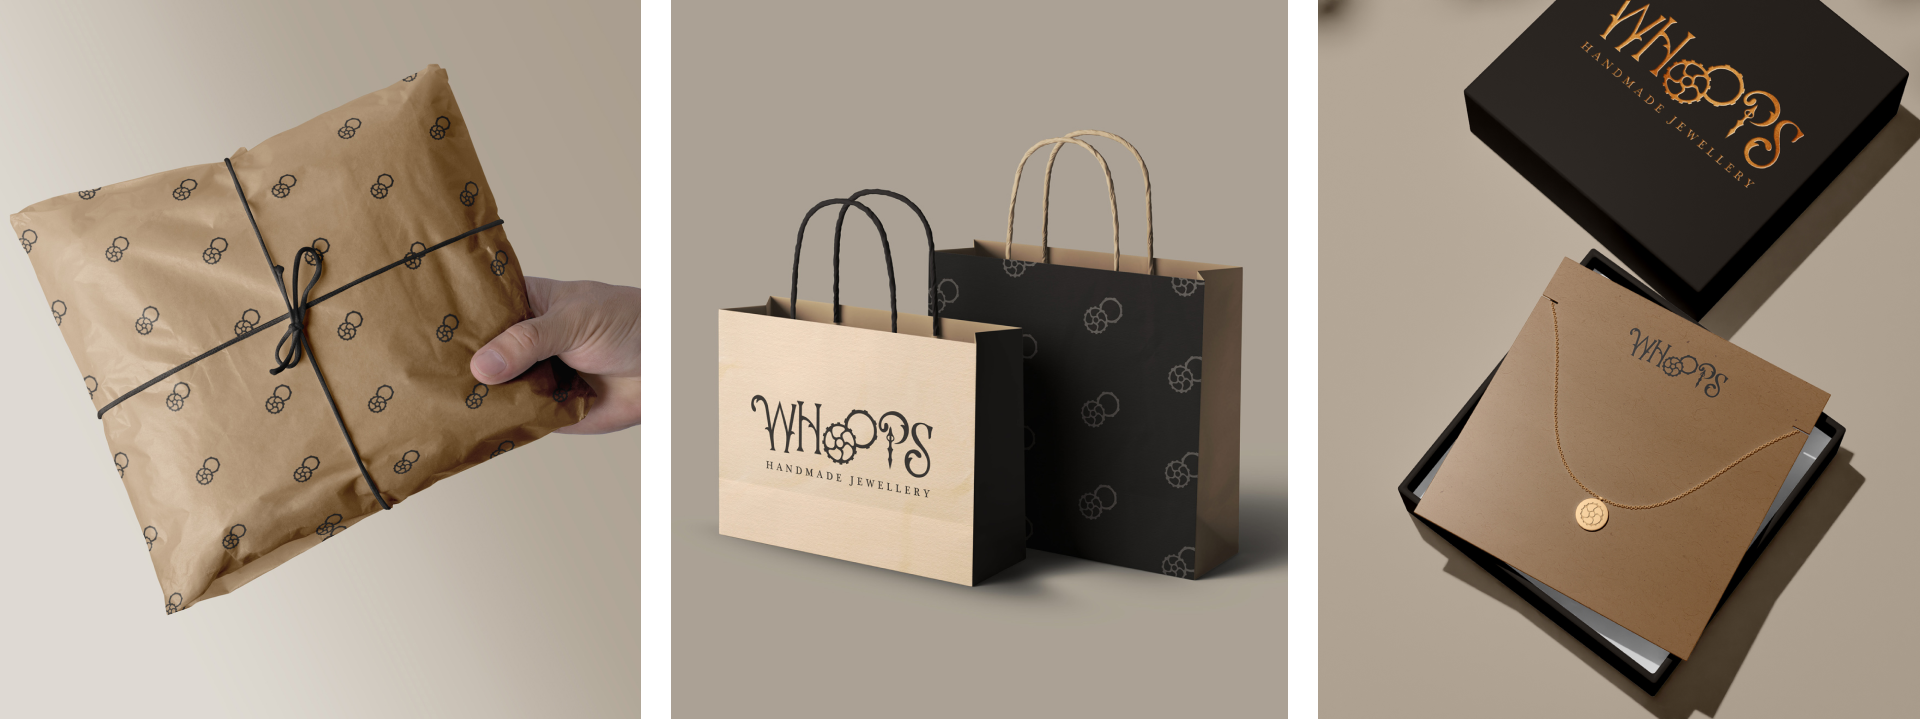 A set of 3 images, one is a hand holding a wrapped item with a spacious gear pattern all over on kraft paper with a black string tied in the middle in a bow, the second is a set of 2 kraft bags with handles branded with the WHOOPS logo and secondary pattern, the third is an open jewellery gift box with a gold necklace displayed on the card.